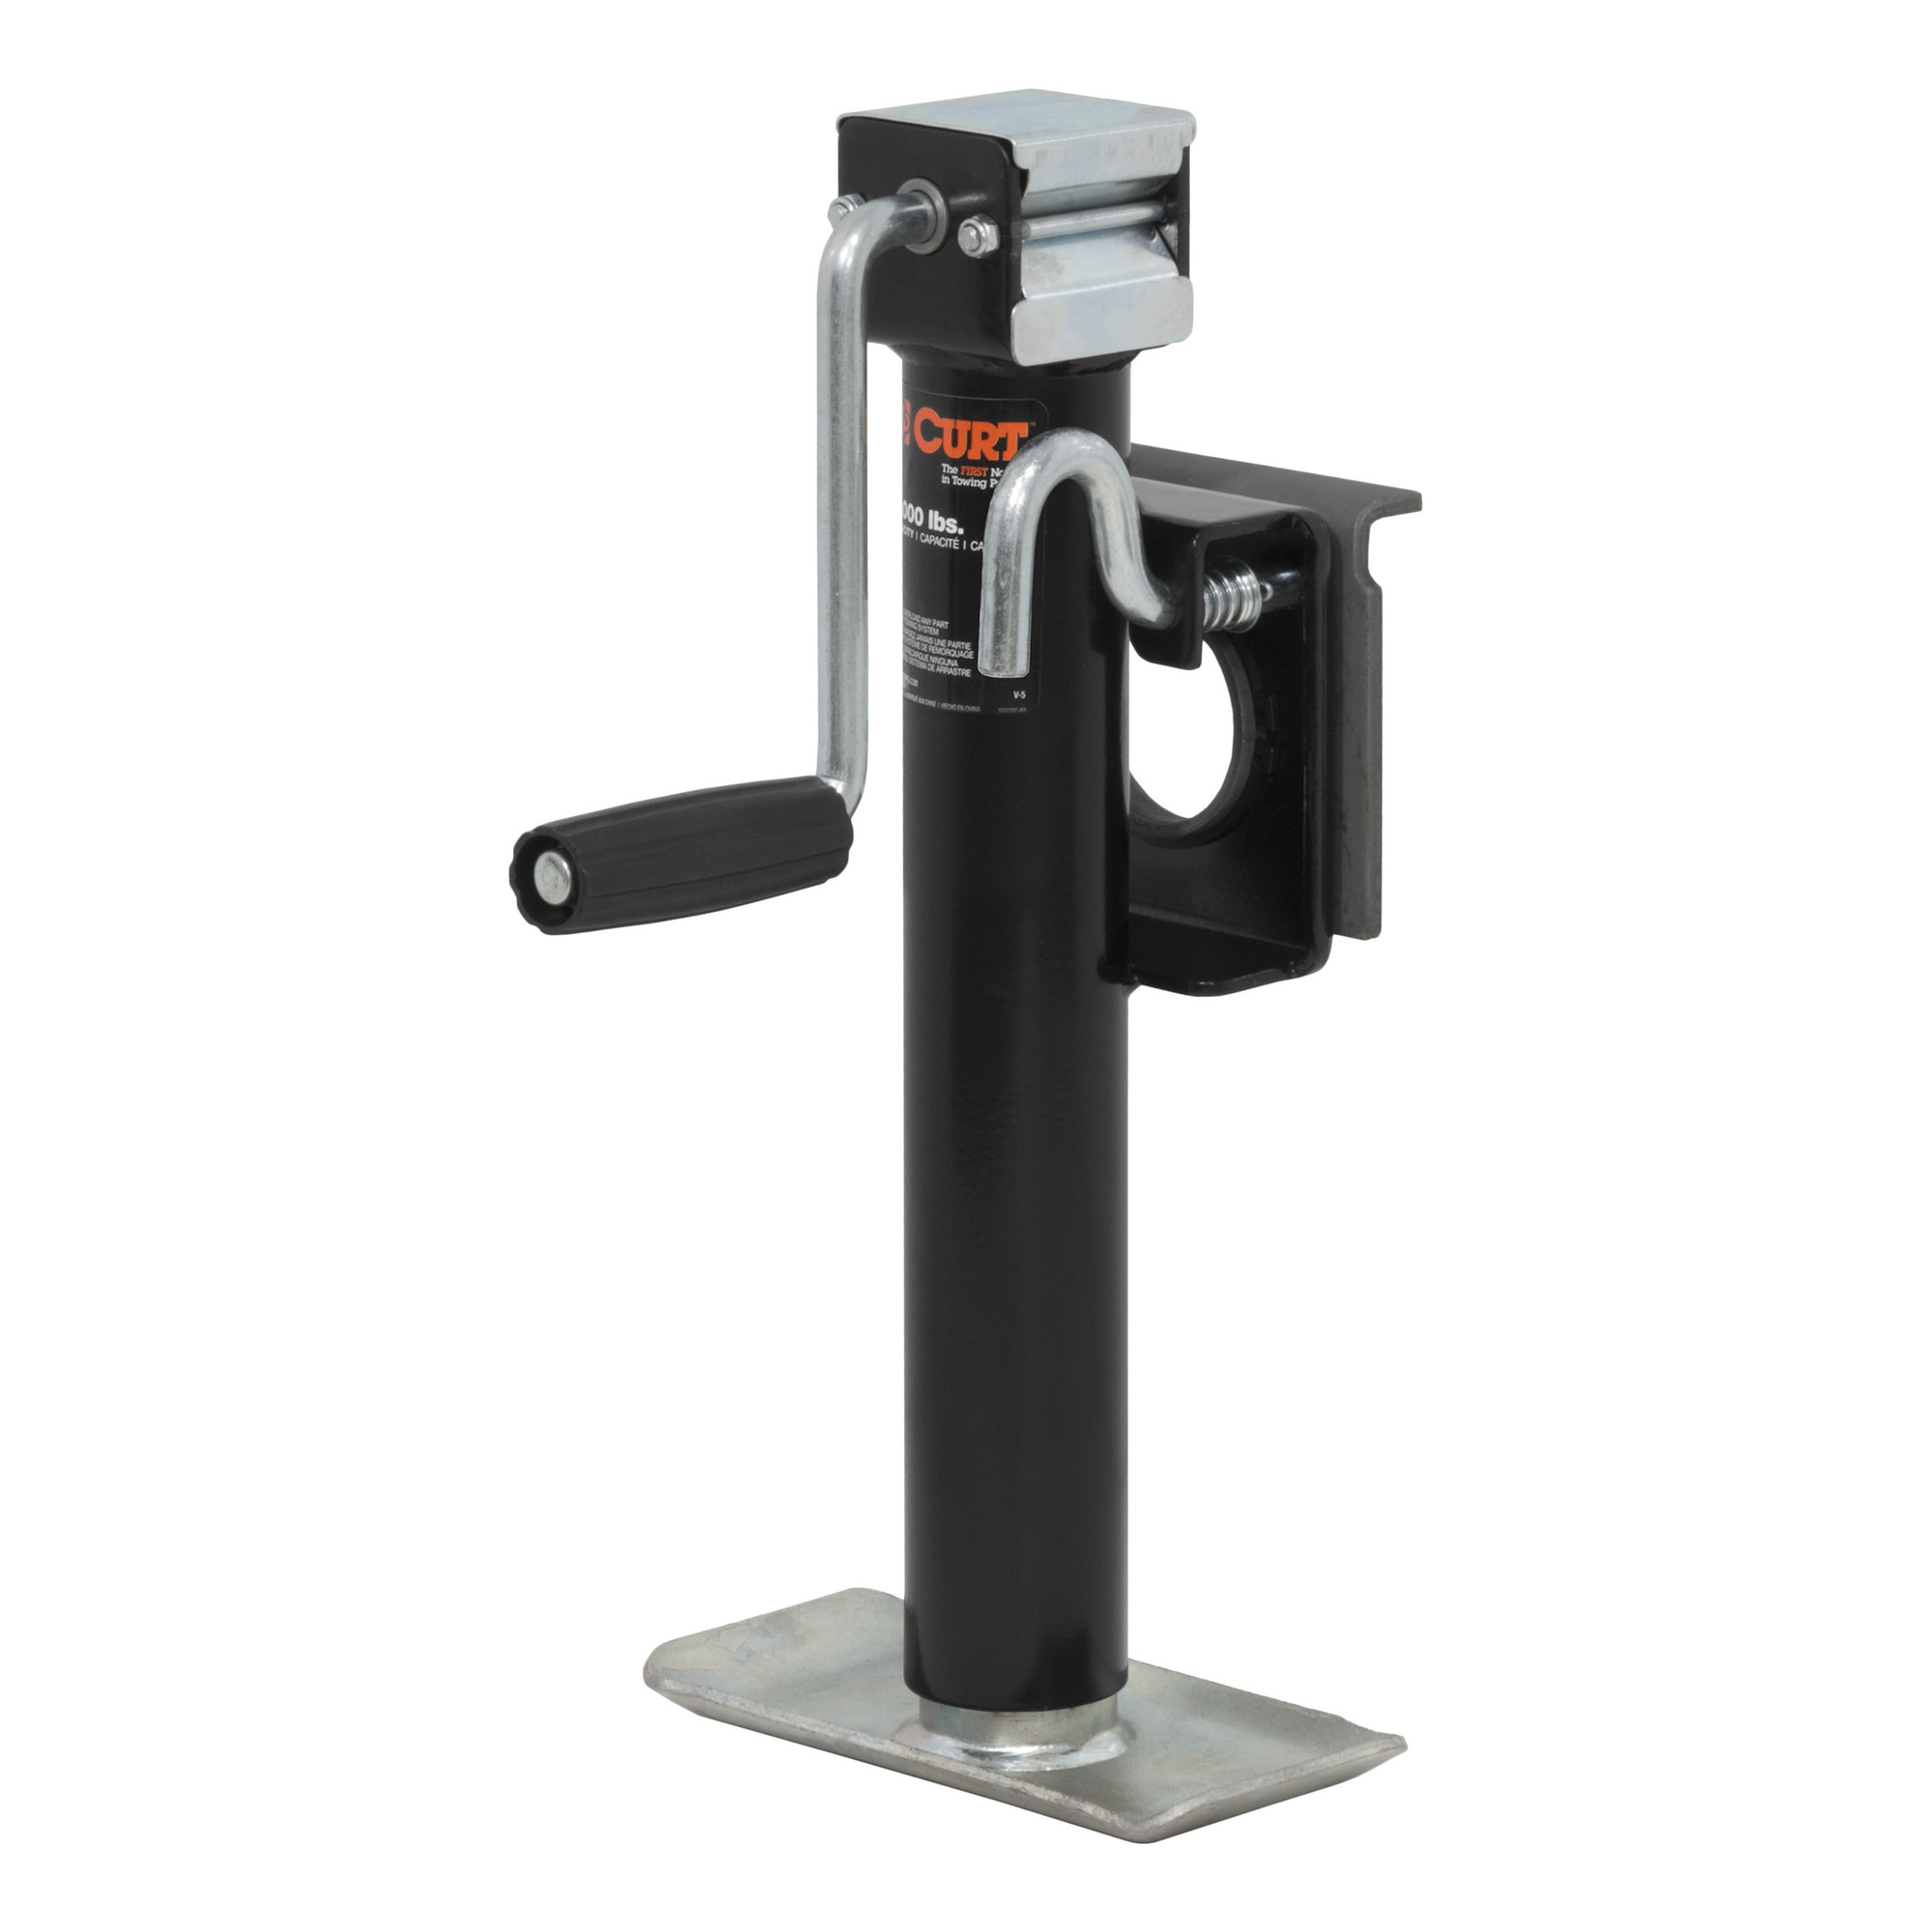 Curt Manufacturing, Bracket-Mnt Jack w Side Handle 2000 lbs 10Inch Travel, Lift Capacity 2000 lb, Jack Type Sidewind, Mount Type Weld-On, Model 28302